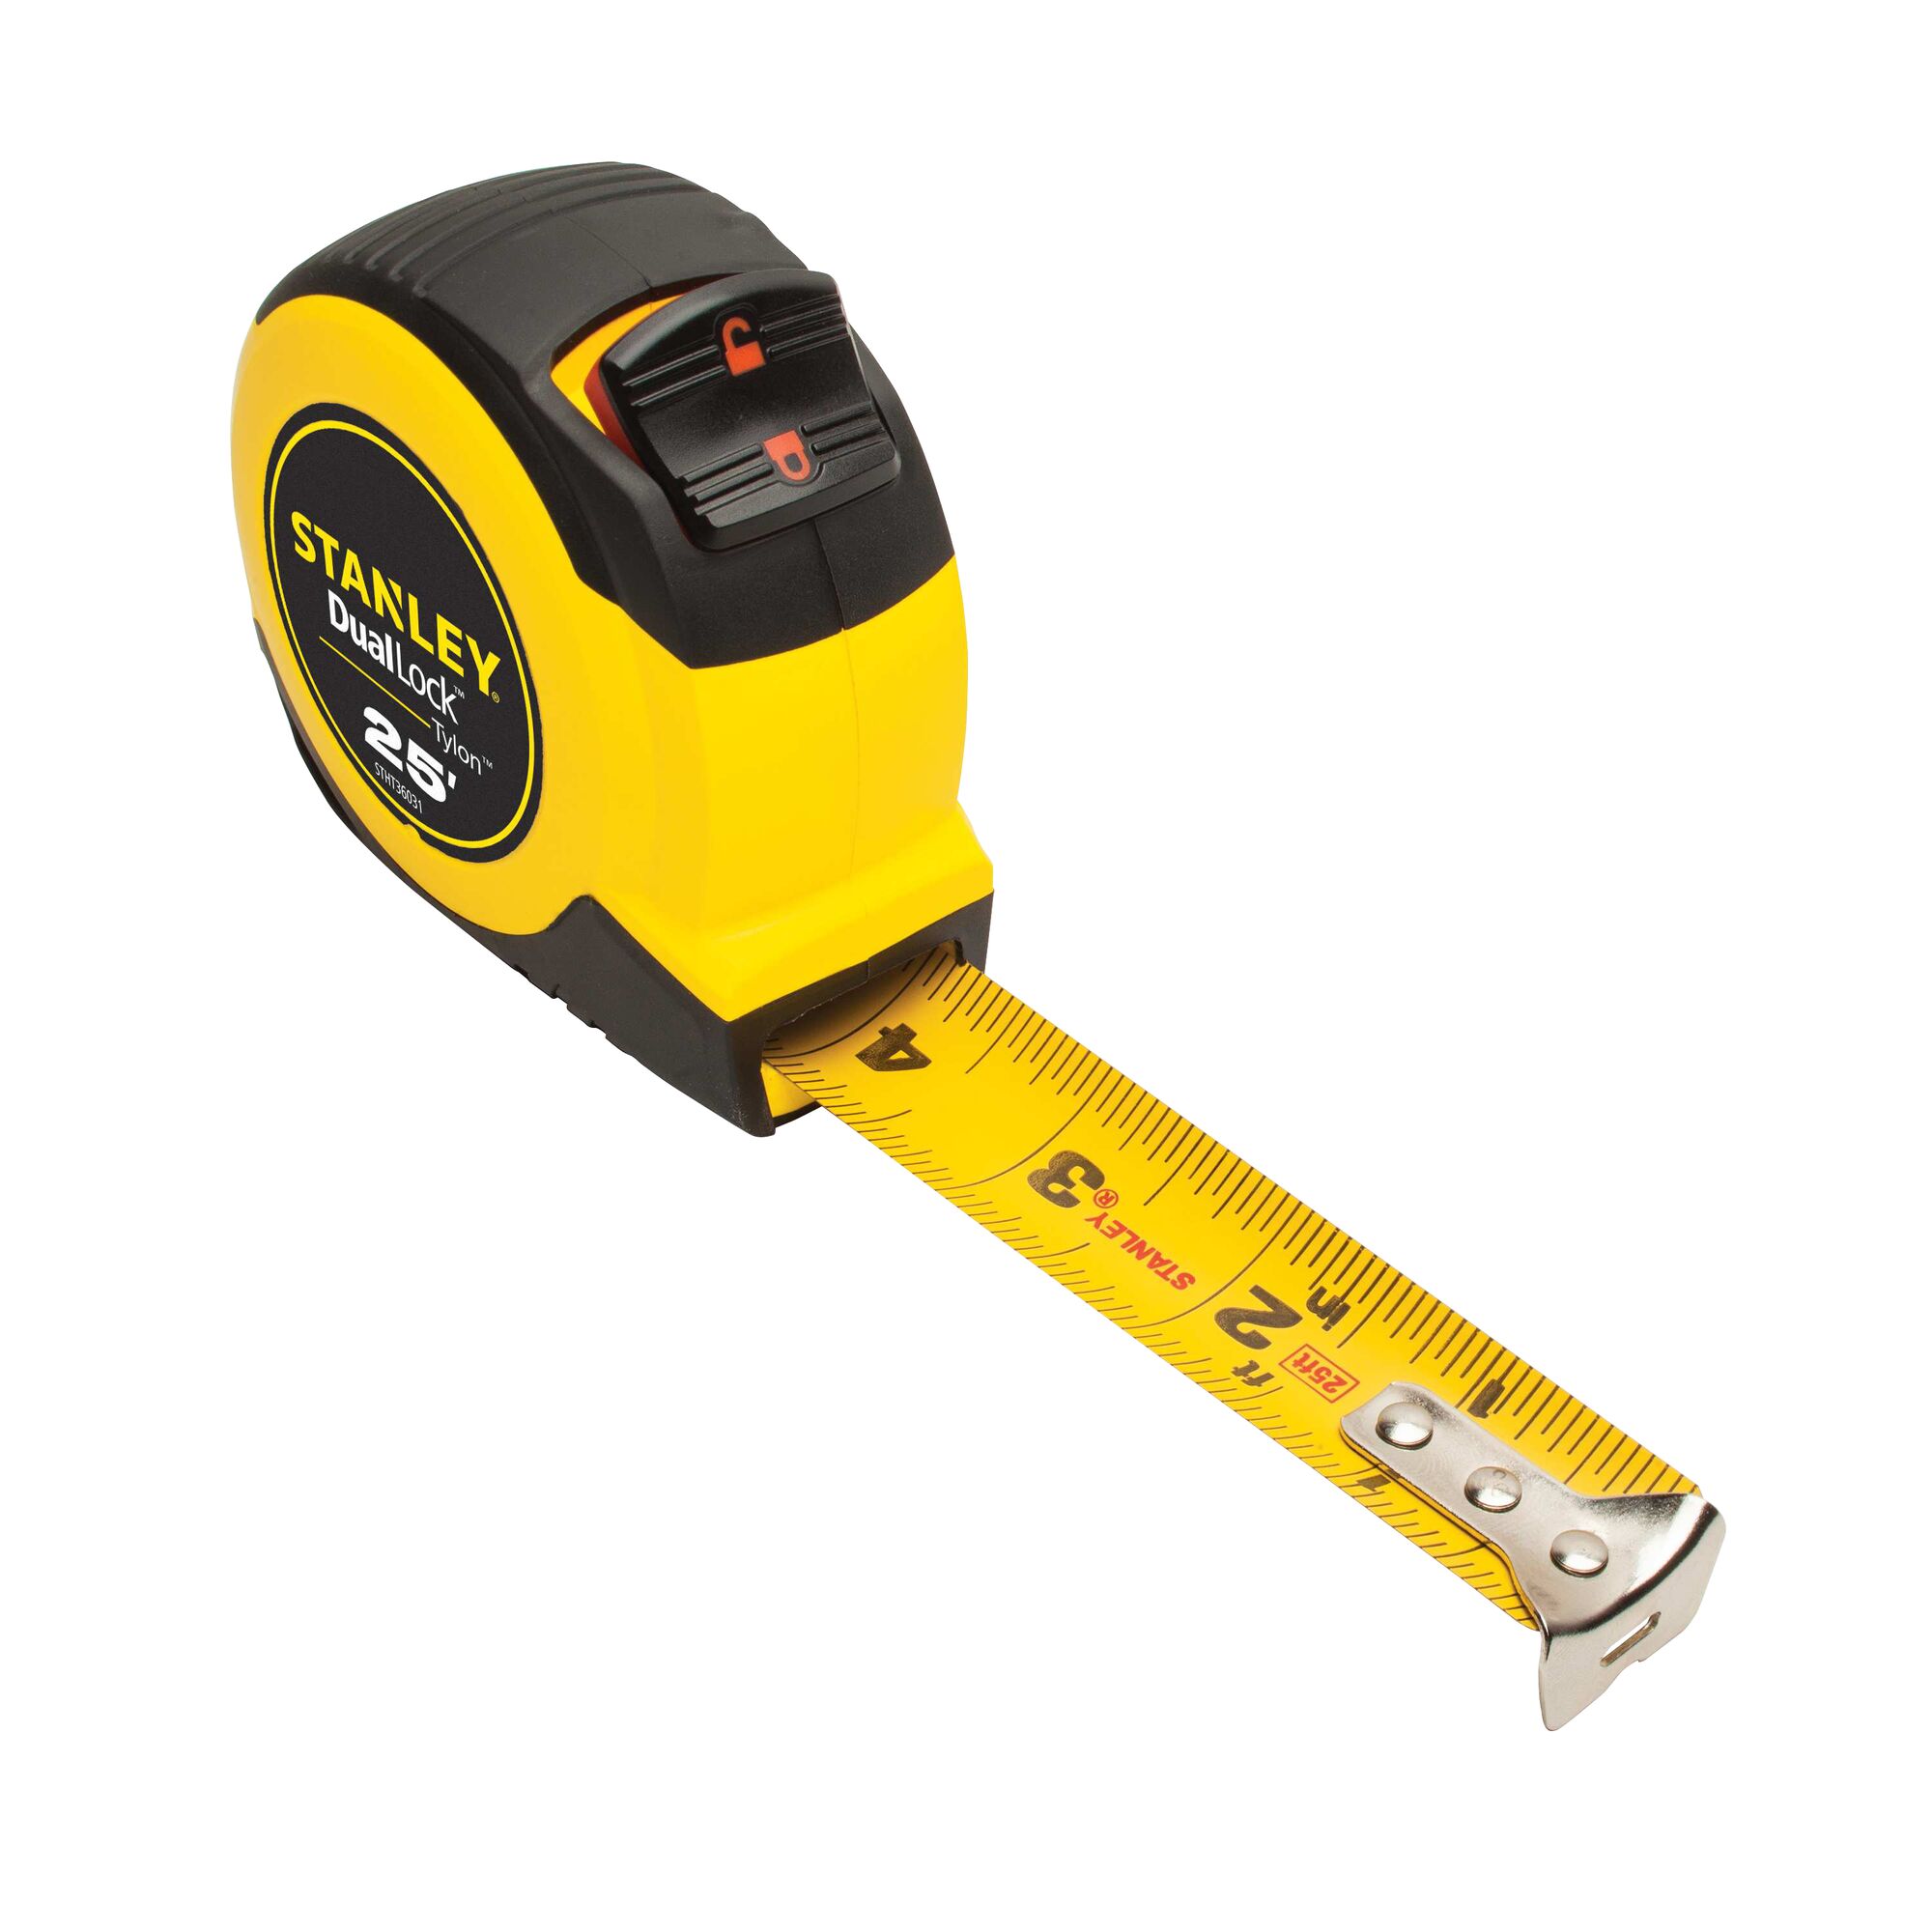 25 Foot Auto-Lock Inch And Metric Graduation With Tape Measure By Clear Style 